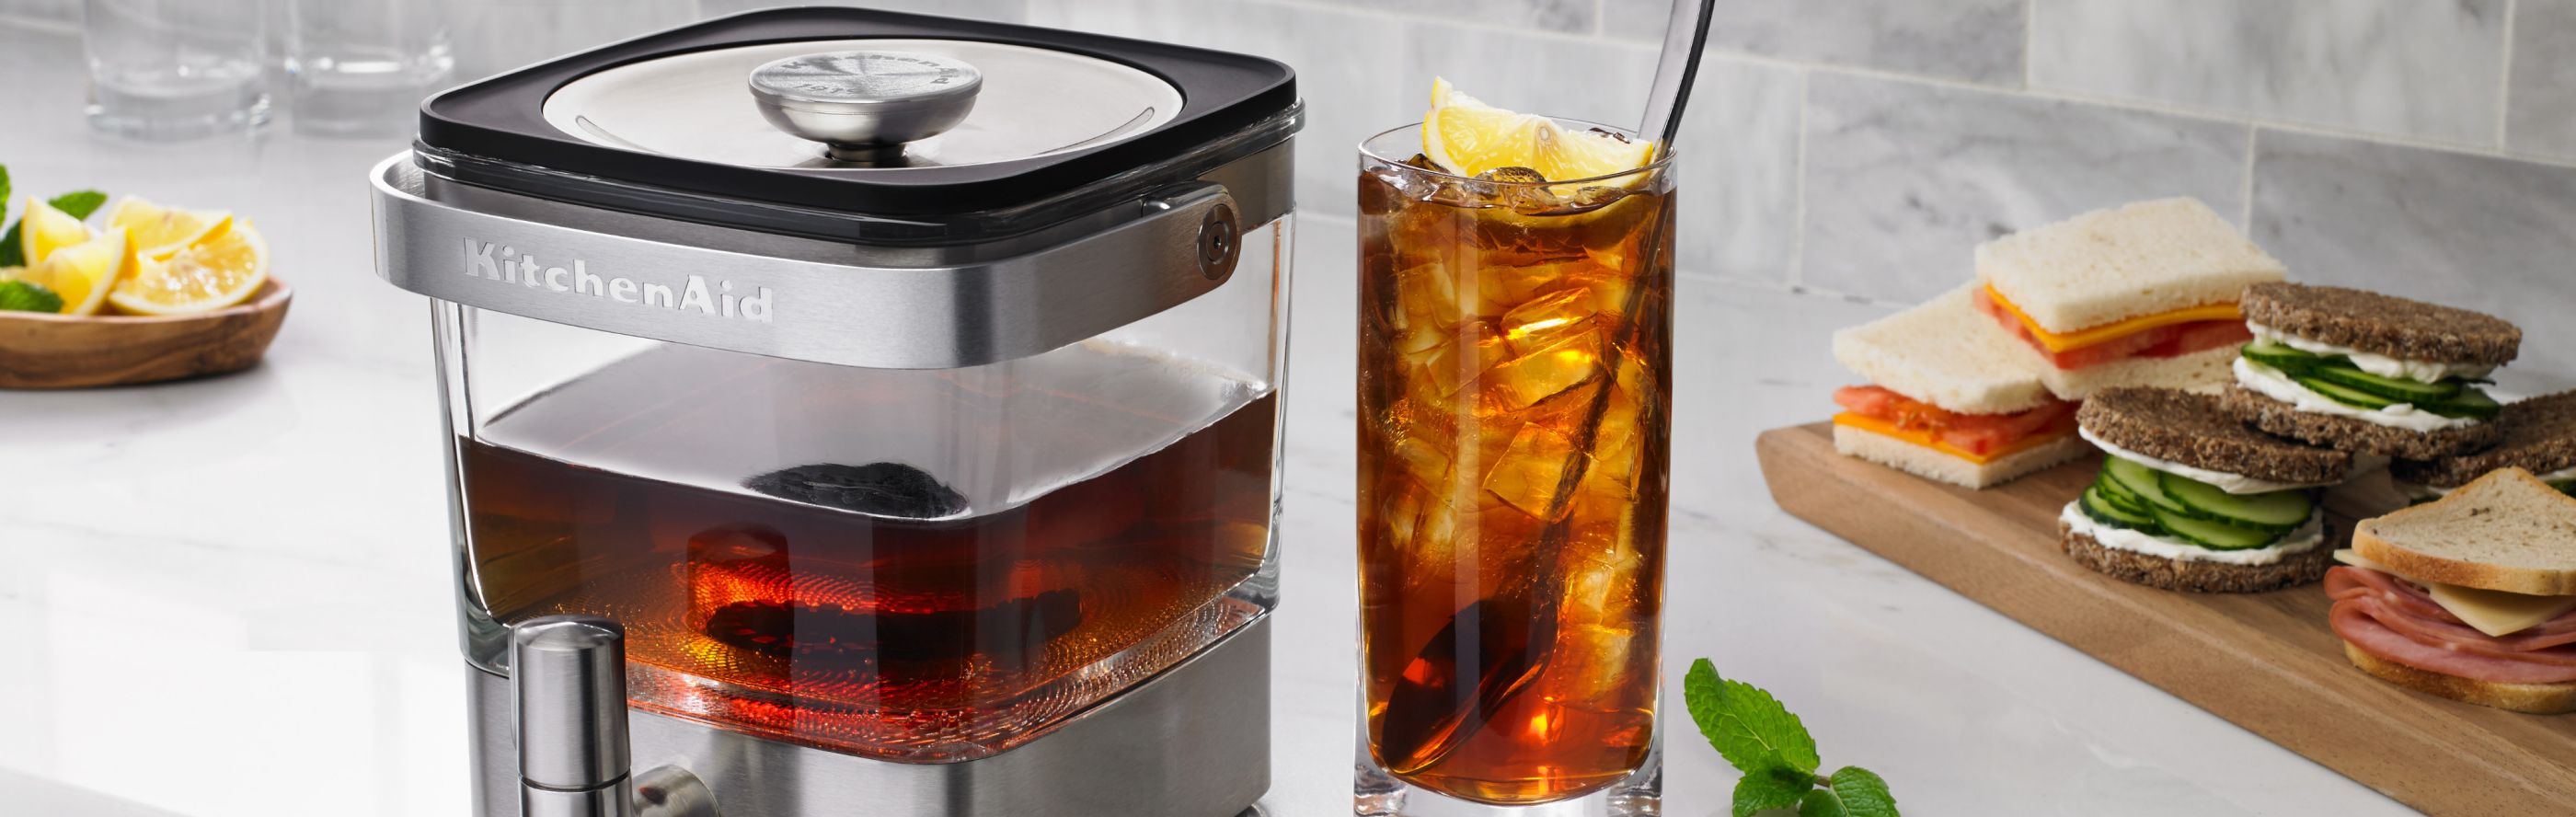 Homemade cold brew tea made in a KitchenAid® cold brew maker